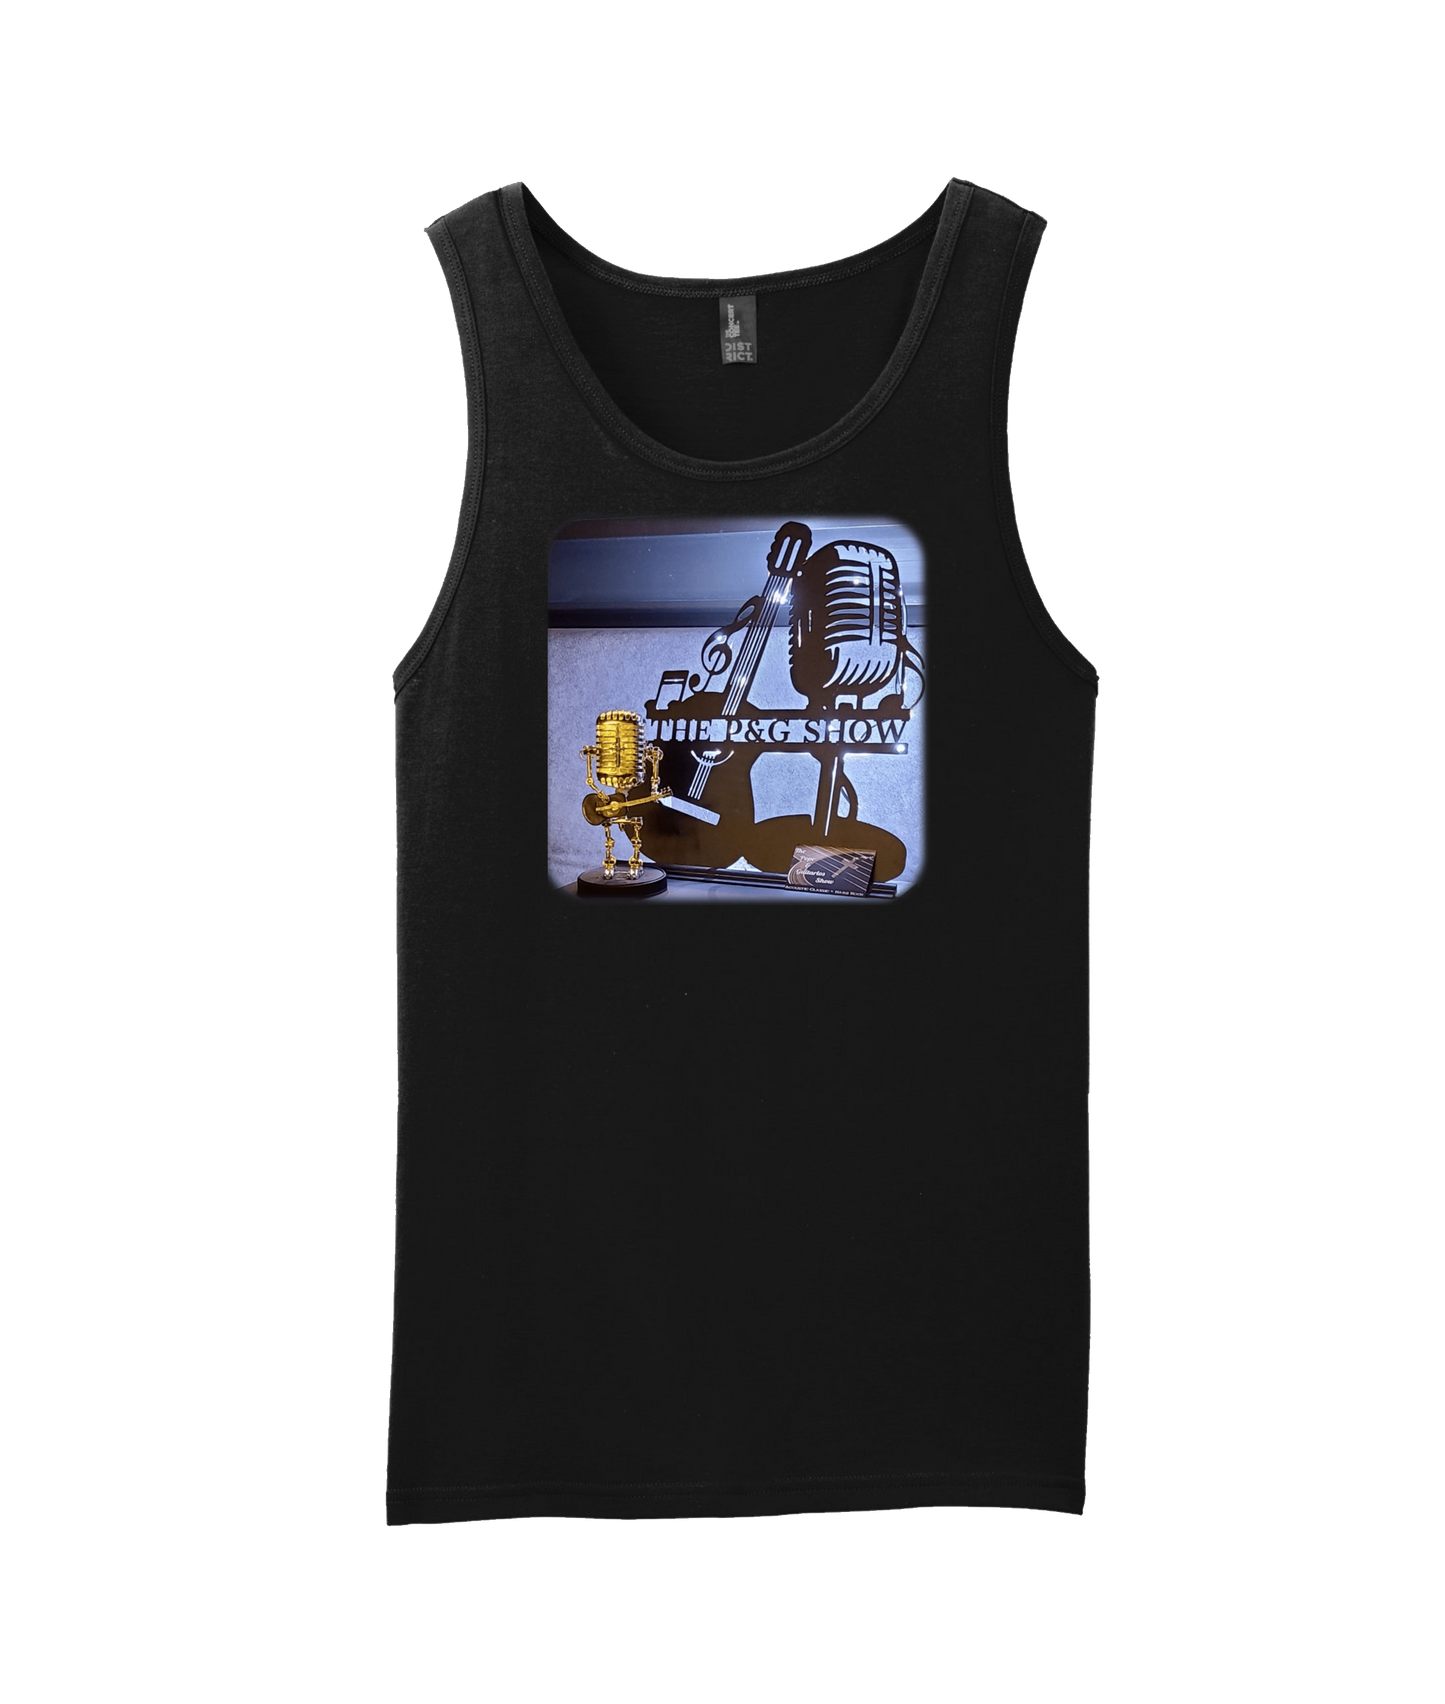 The Pope and Guitarlos Show - Mic Guitar - Black Tank Top